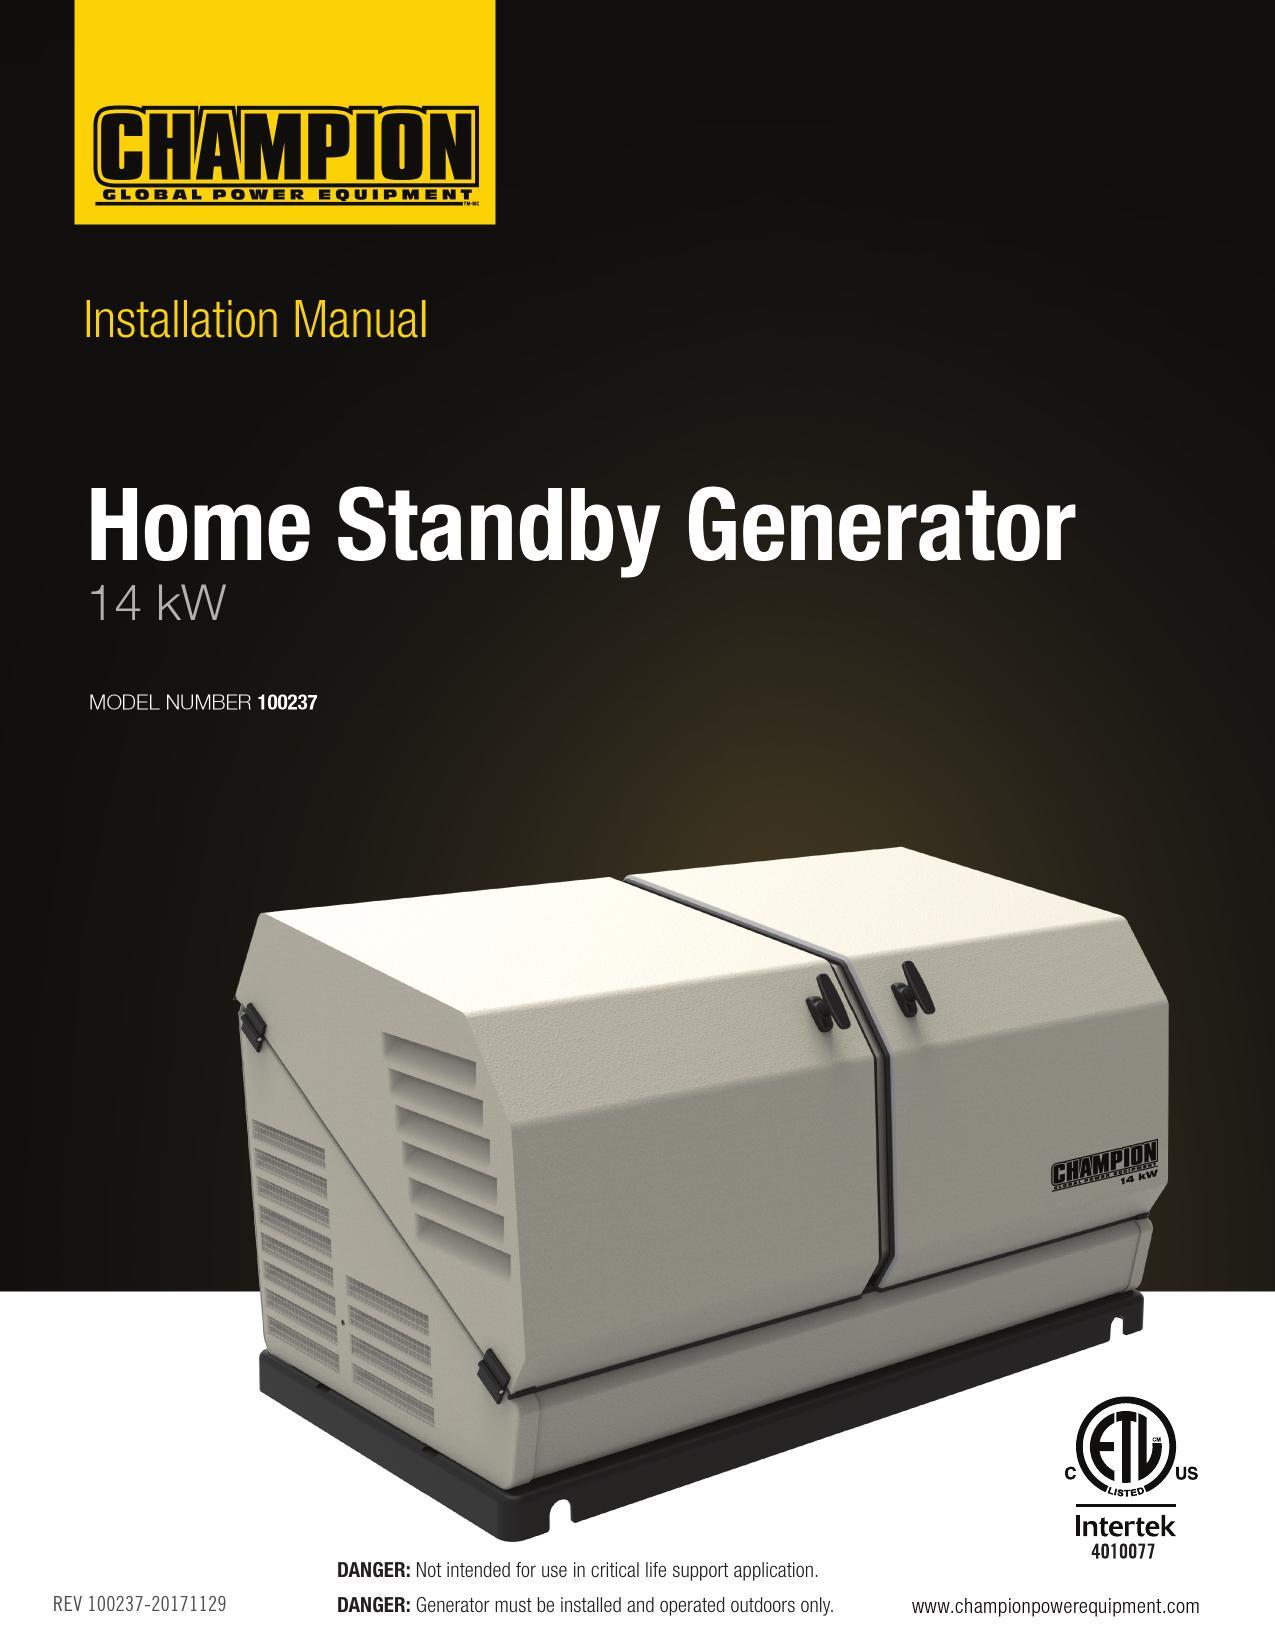 installation-manual-for-champion-power-equipment-home-standby-generator-14-kw-model-number-100237.pdf